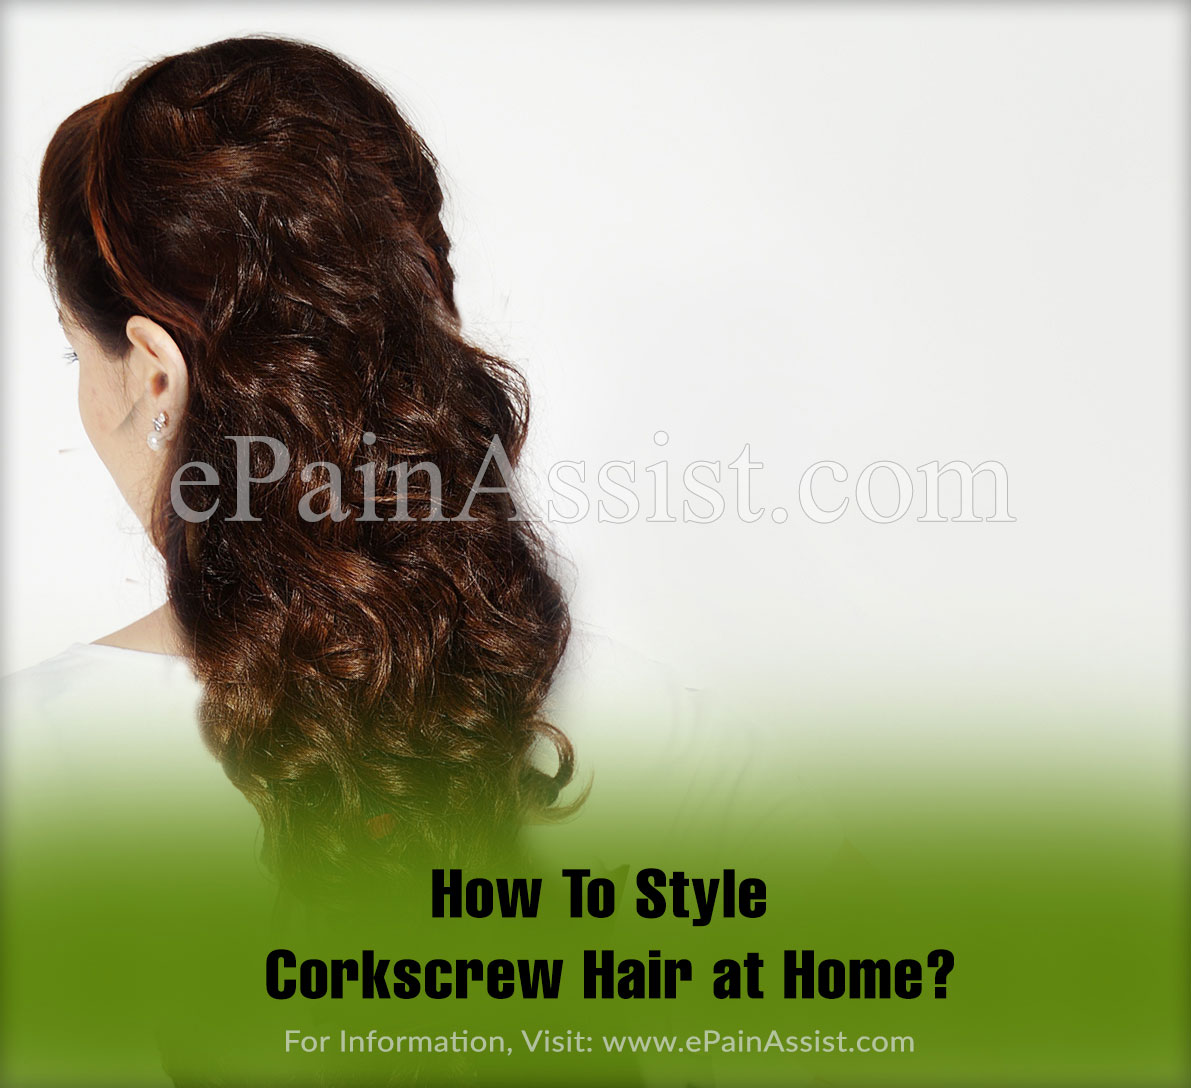 How To Style Corkscrew Hair at Home?